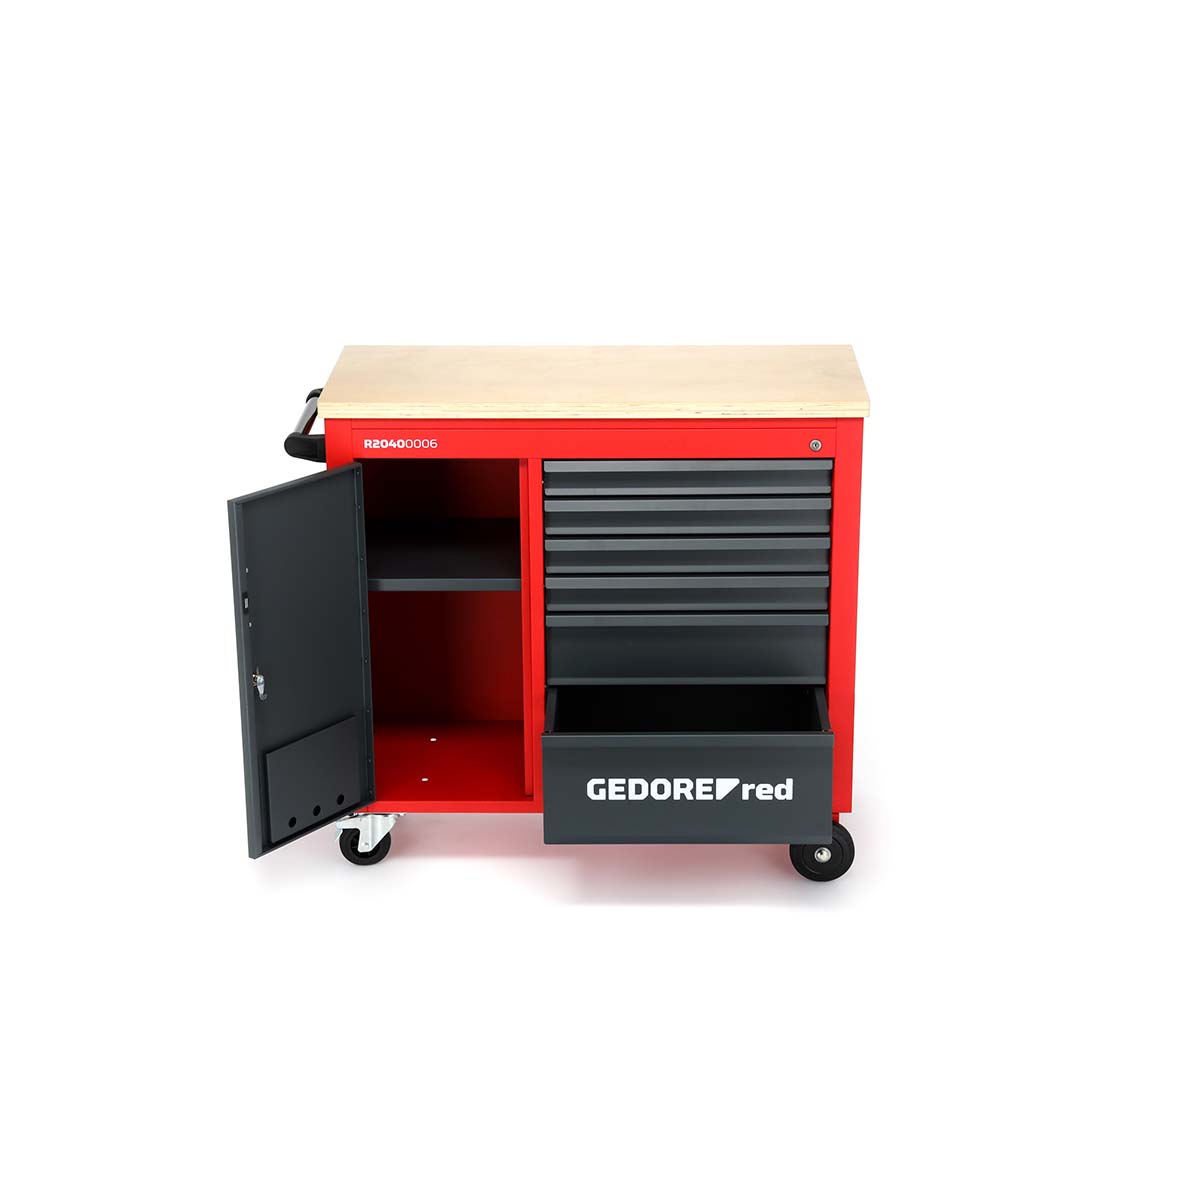 GEDORE red R20400006 - MECHANIC mobile workbench, with 6 drawers 988x431x935 mm (3301818)